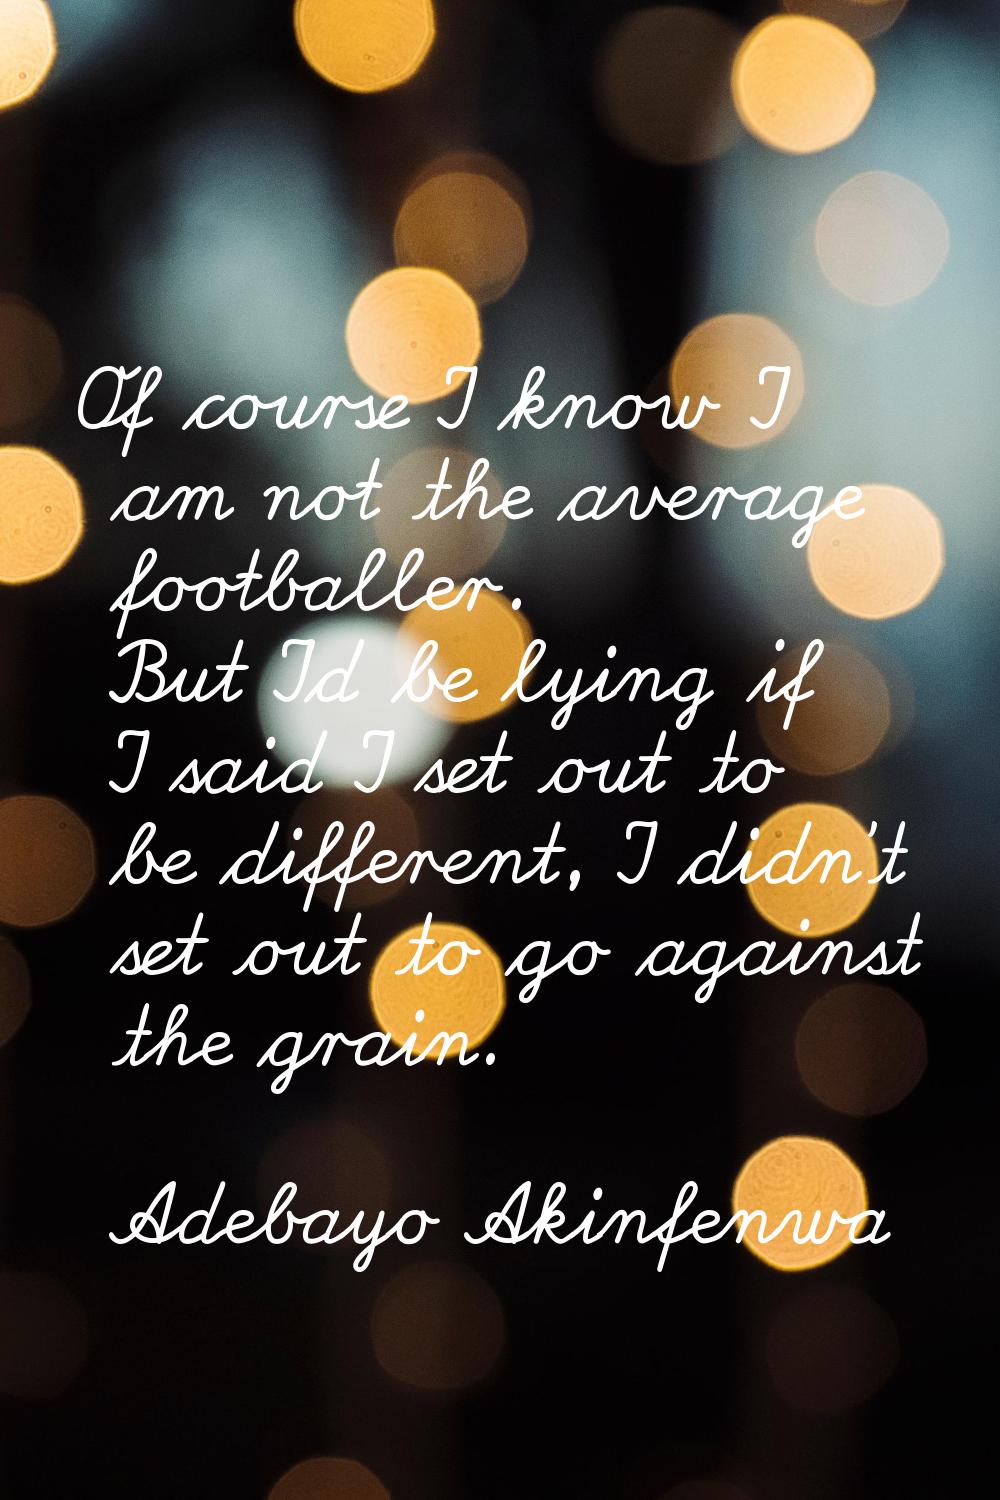 Of course I know I am not the average footballer. But I'd be lying if I said I set out to be differ